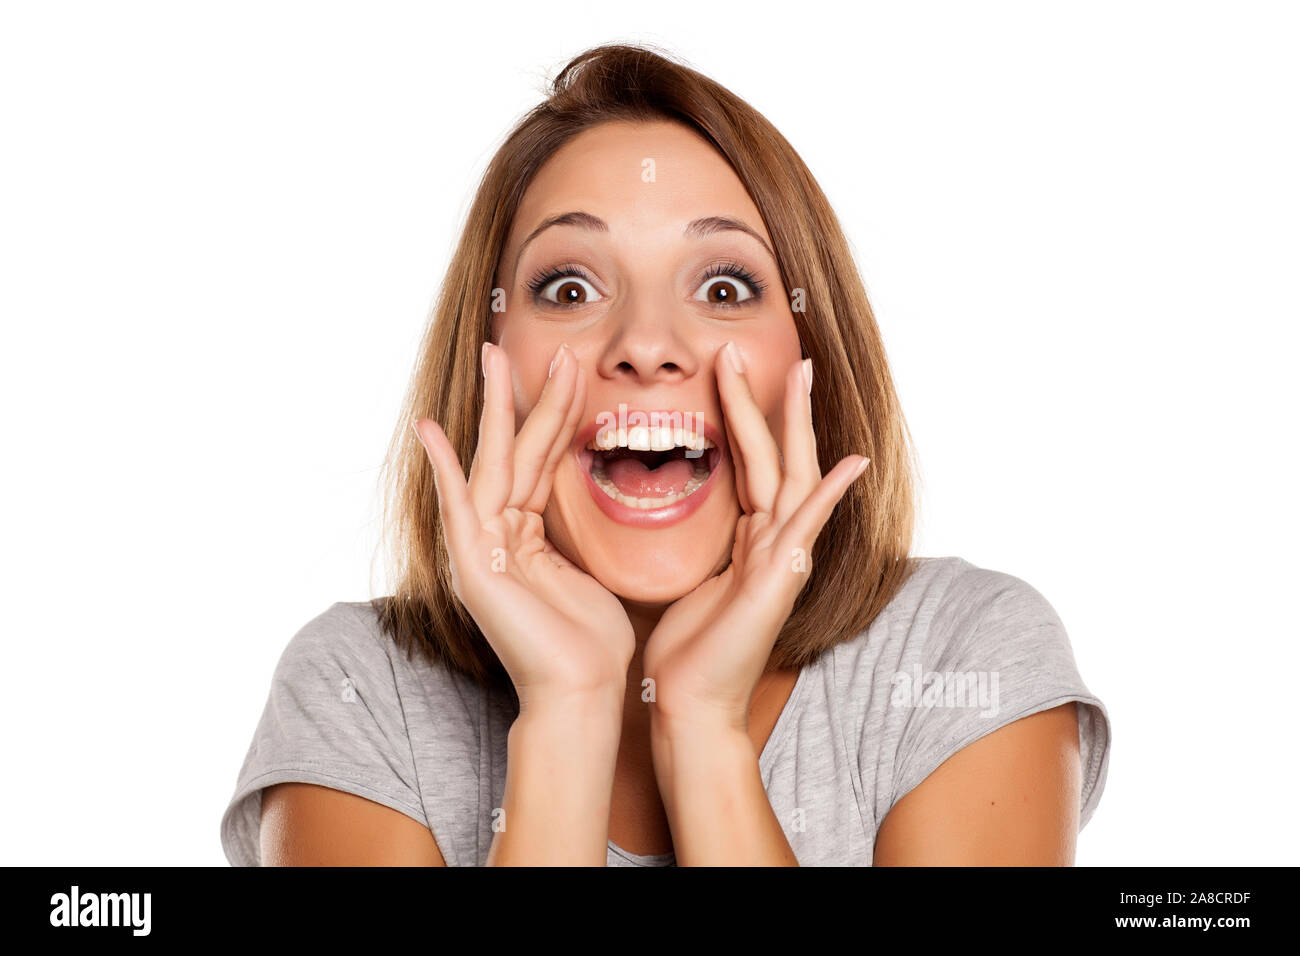 happy woman yelling with hands next to the mouth Stock Photo